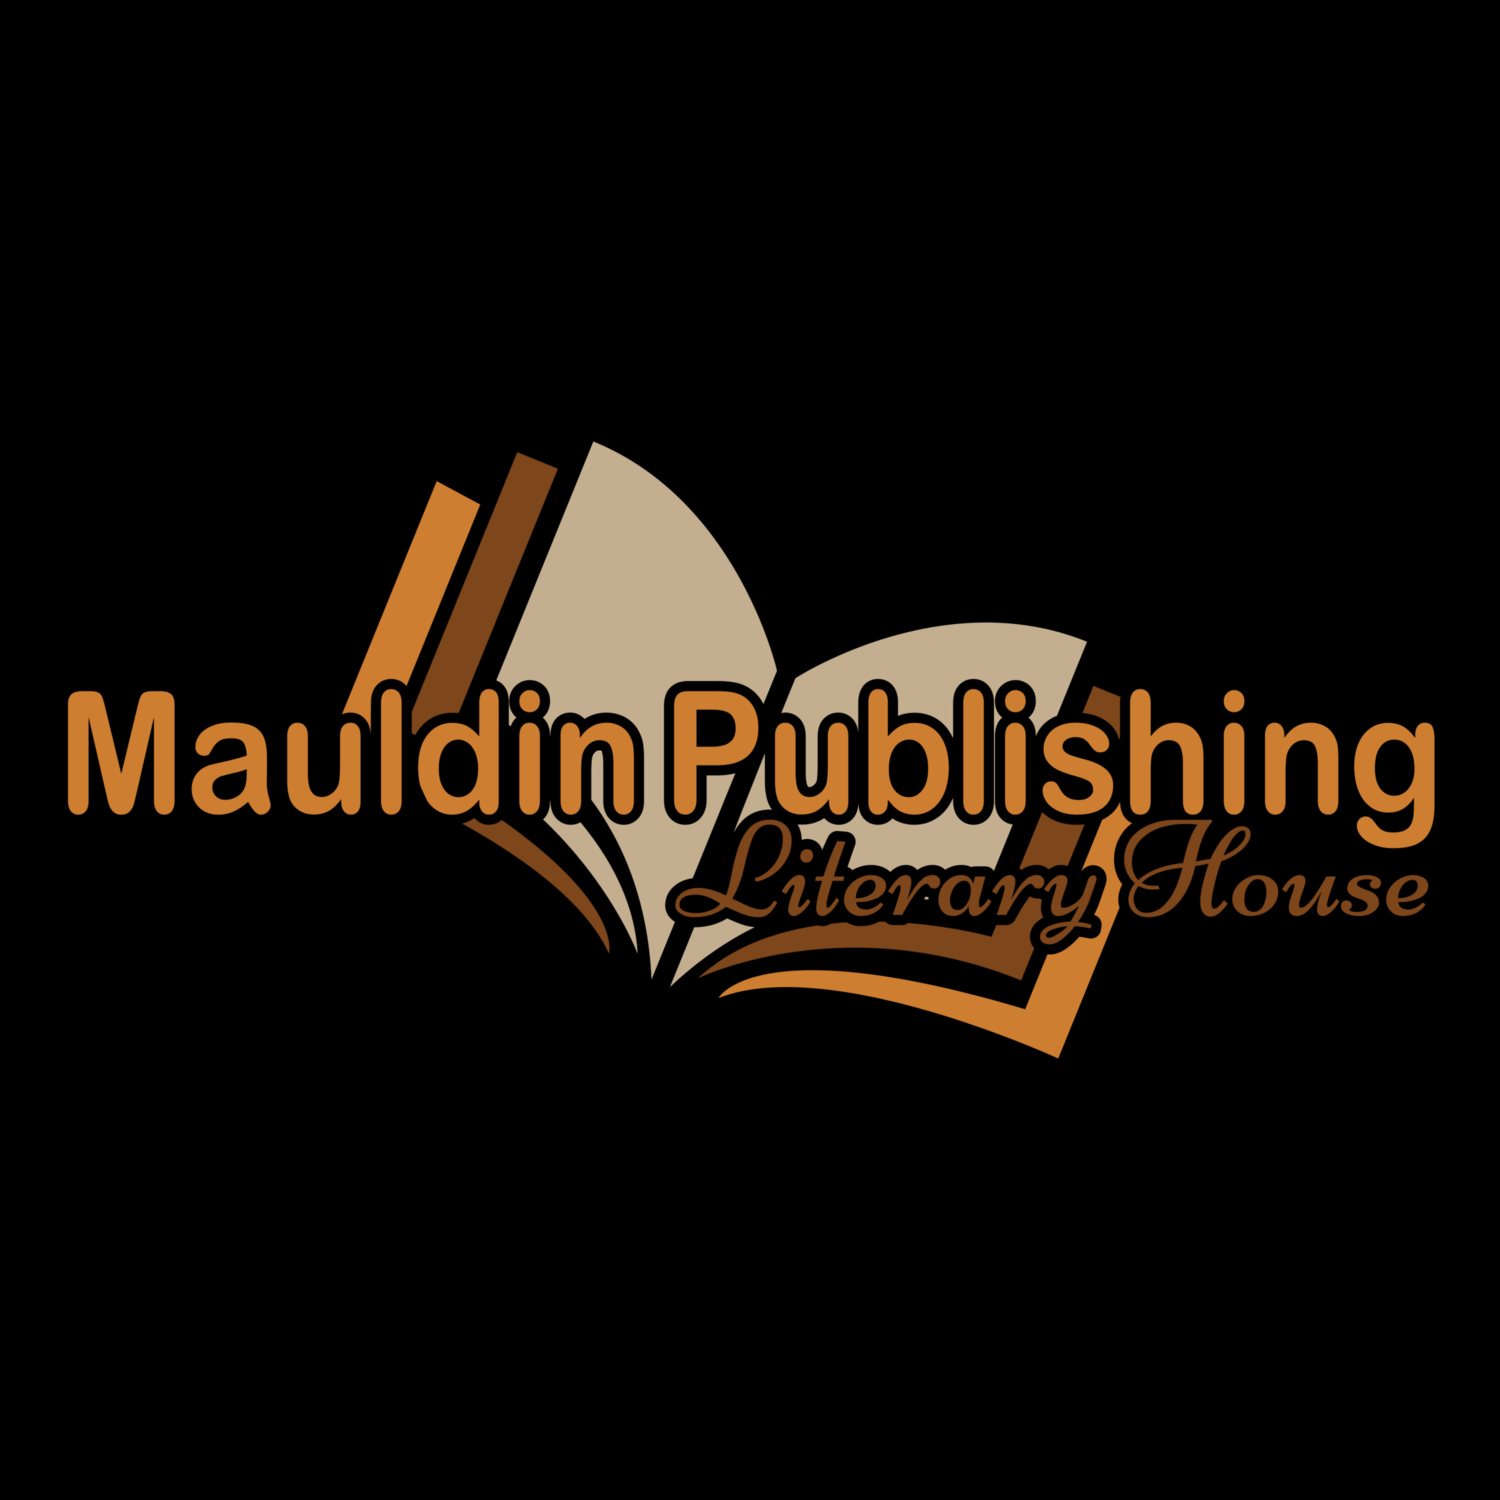 Official Site of Mauldin Publishing & Literacy House